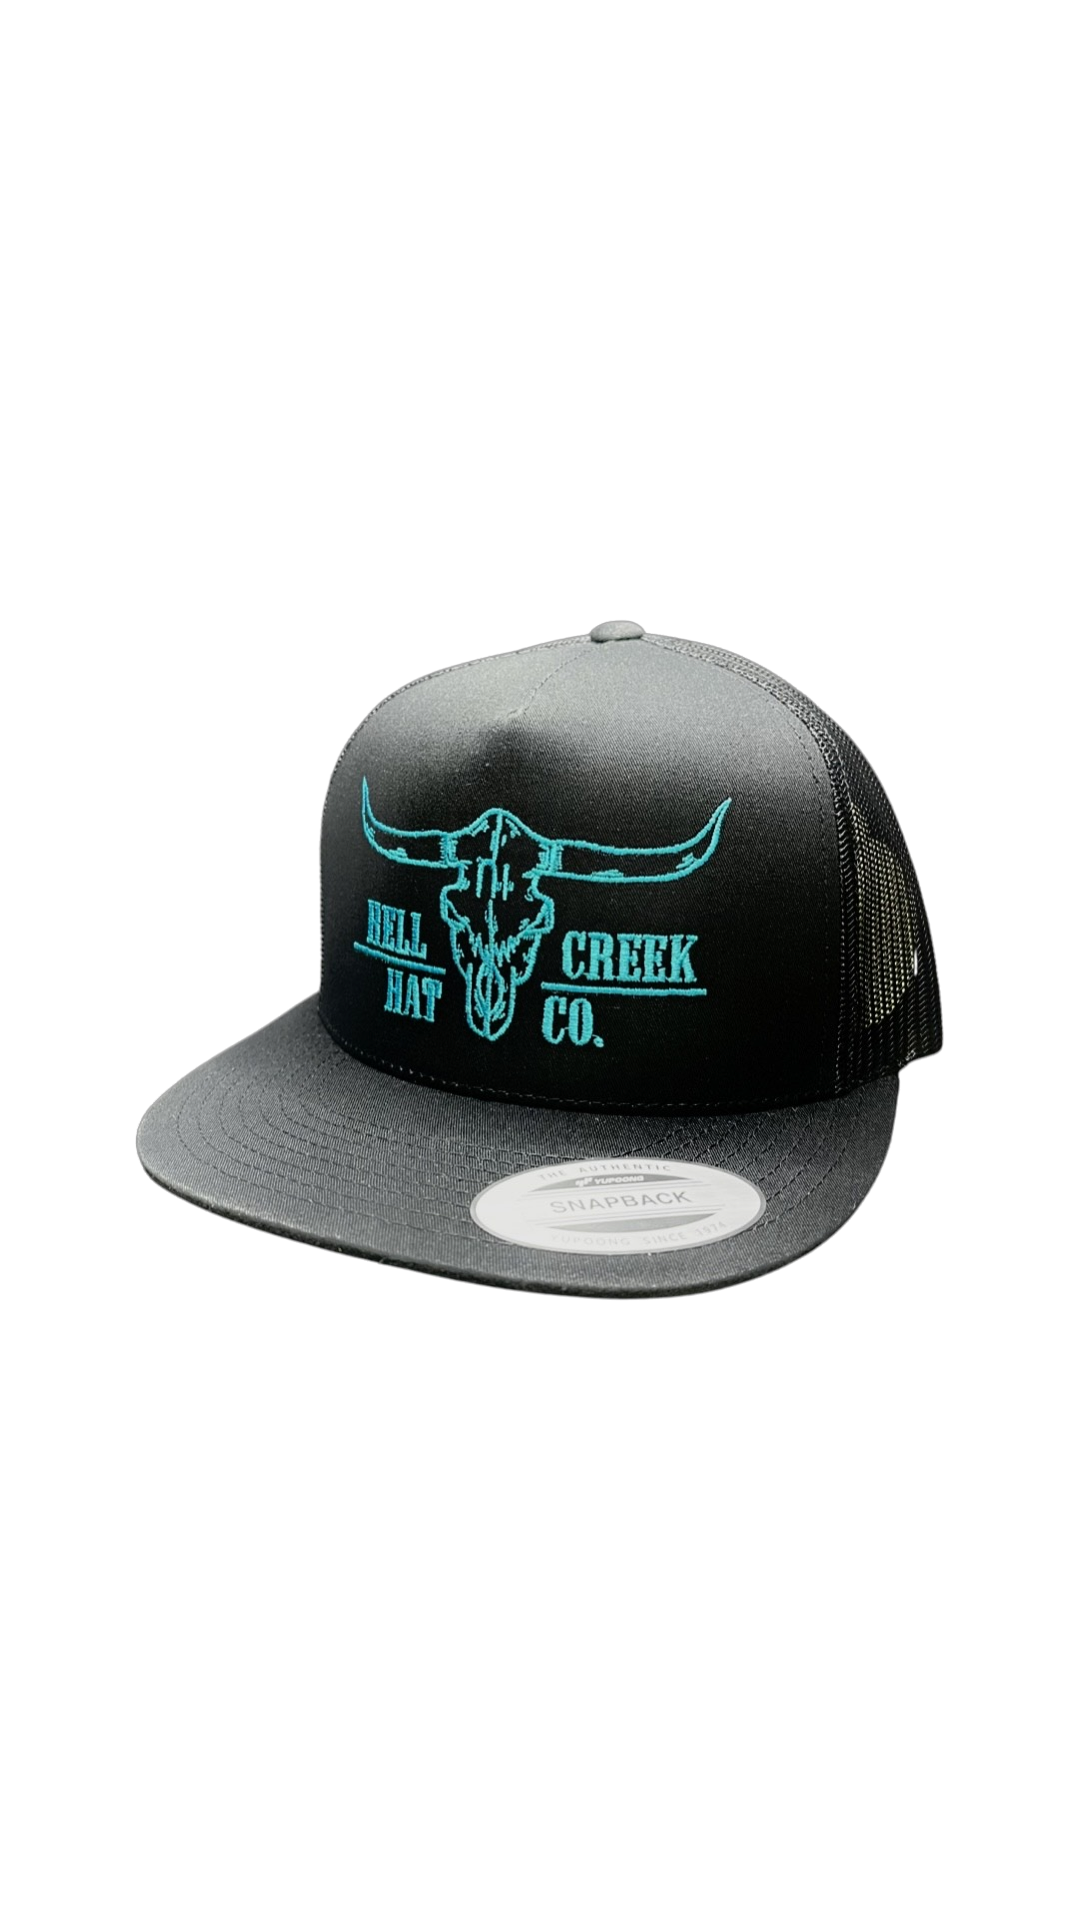 Teal/blk “Ace”